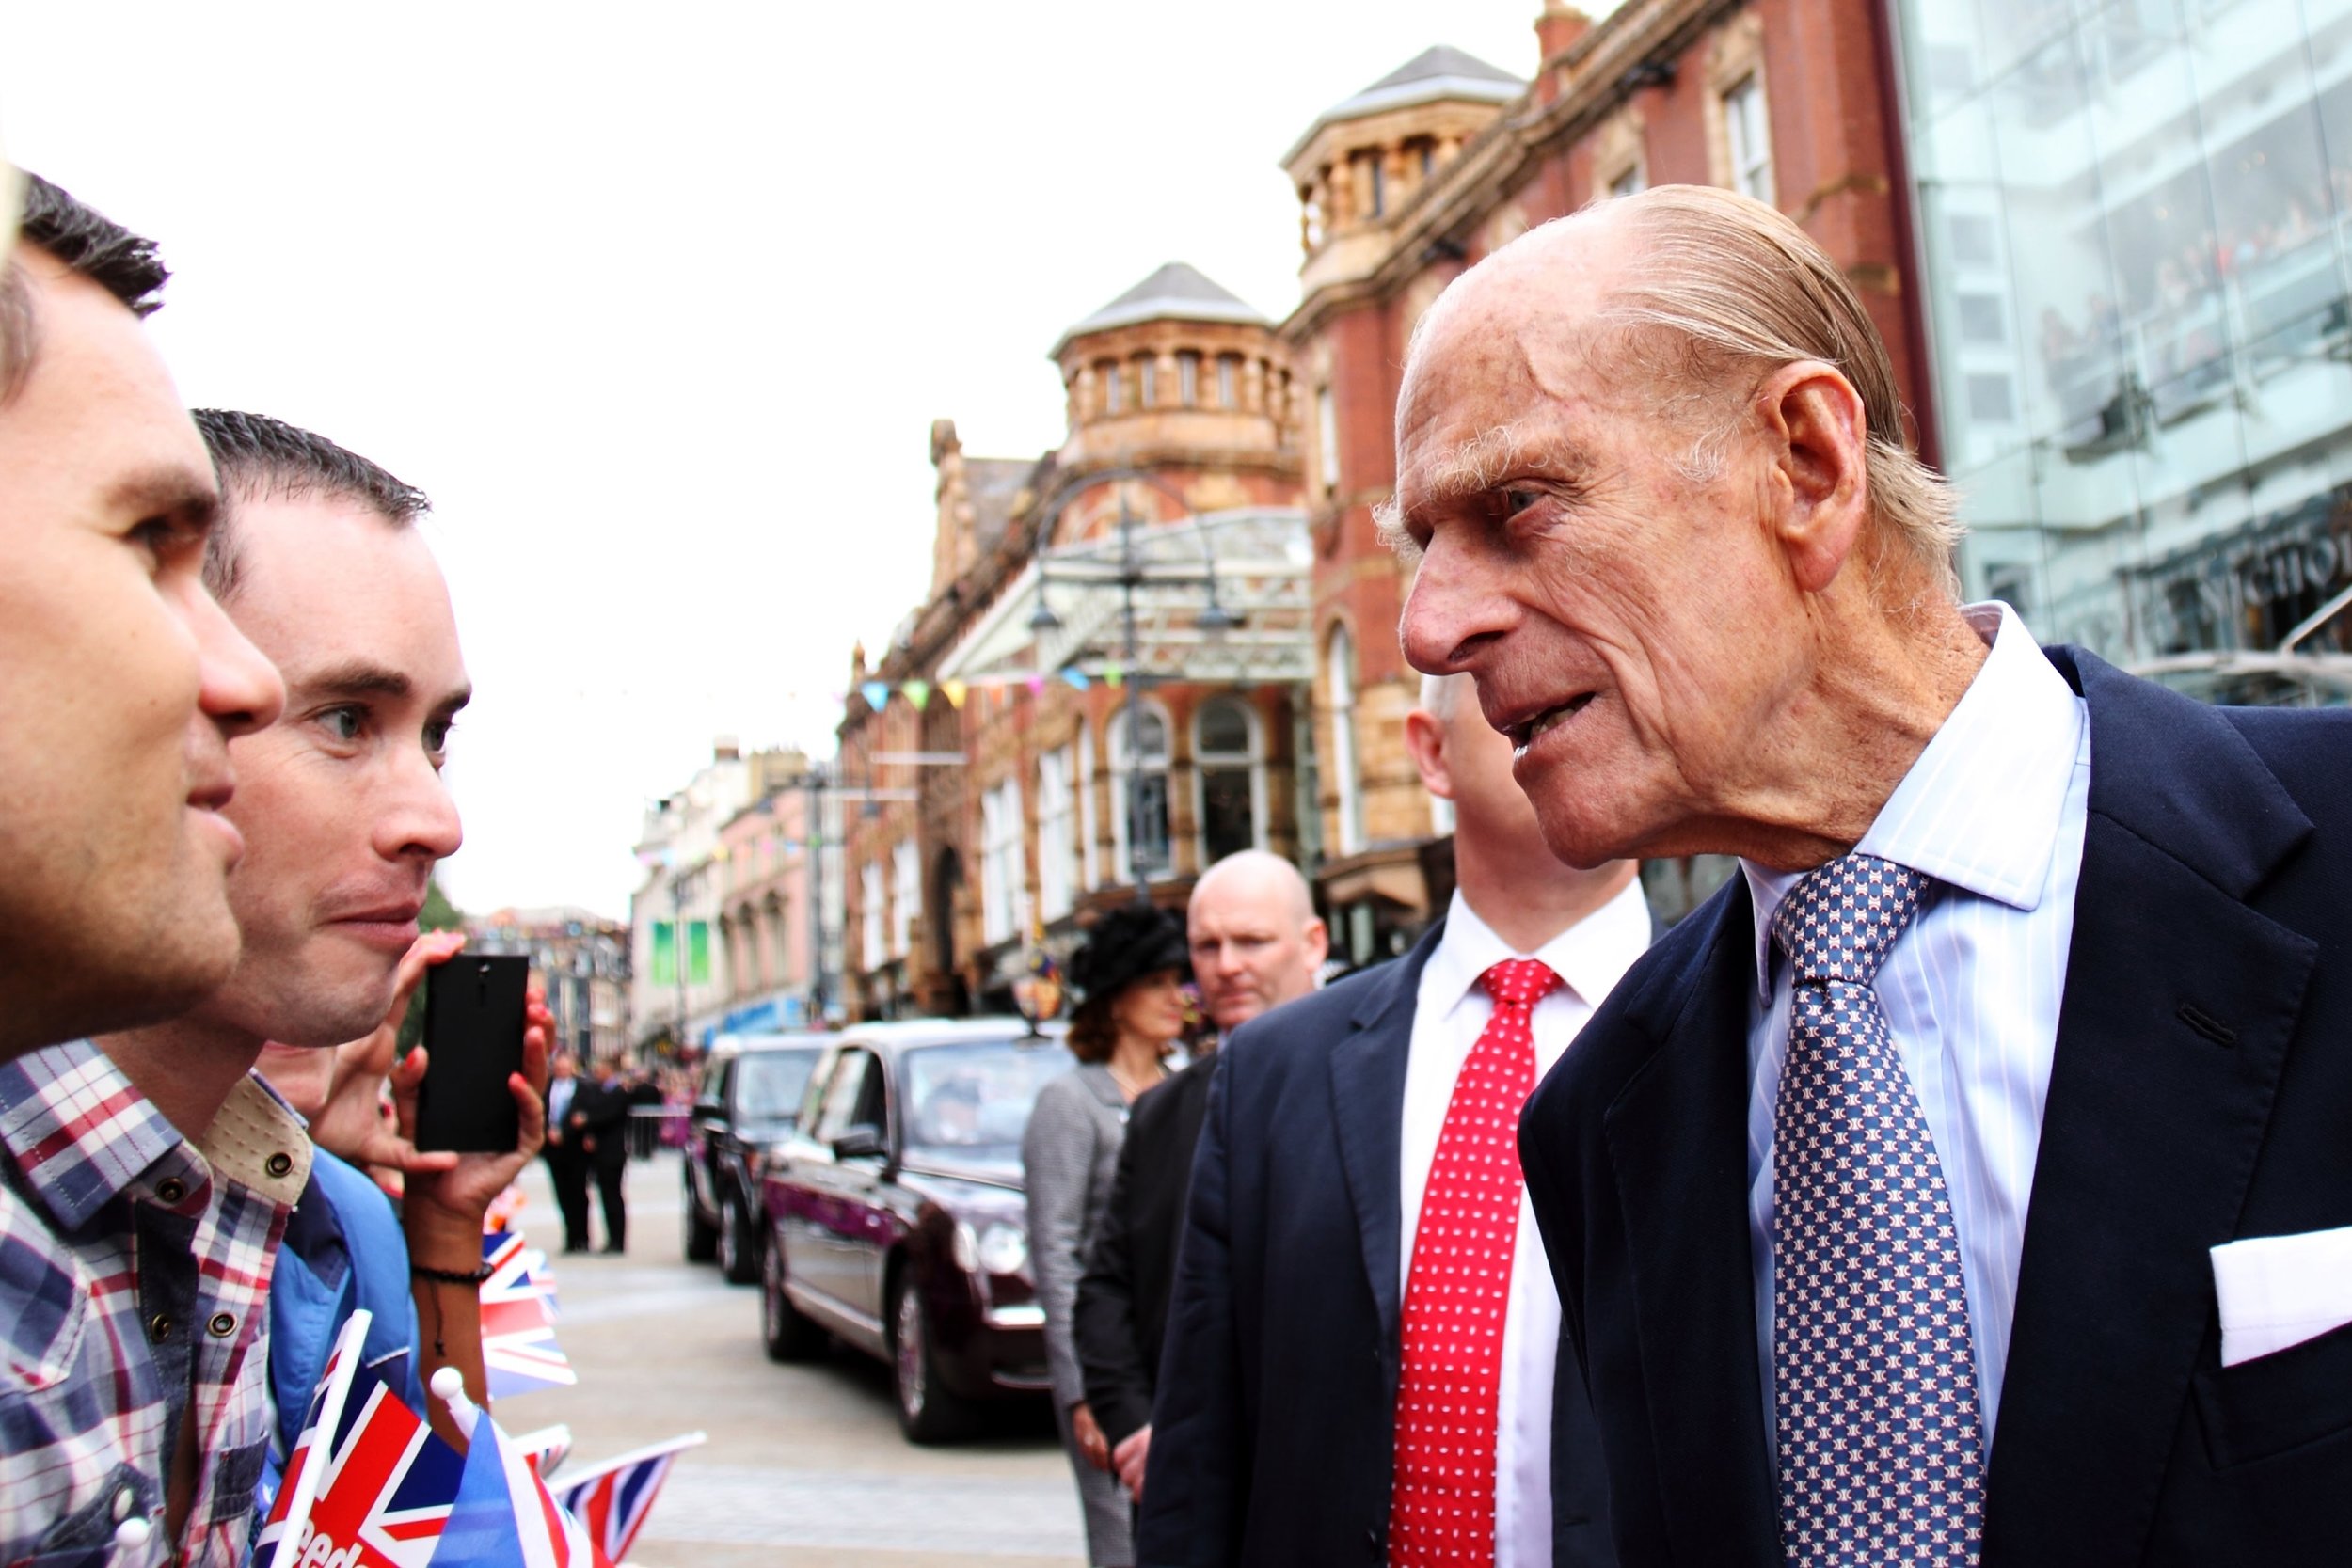  This image was taken the day The Queen and The Duke Of Edinburgh visited Leeds and treated us to a walkabout. I'd never been lucky enough to be at a Royal walkabout before and the fact it was happening in my city really added to the thrill..The crow